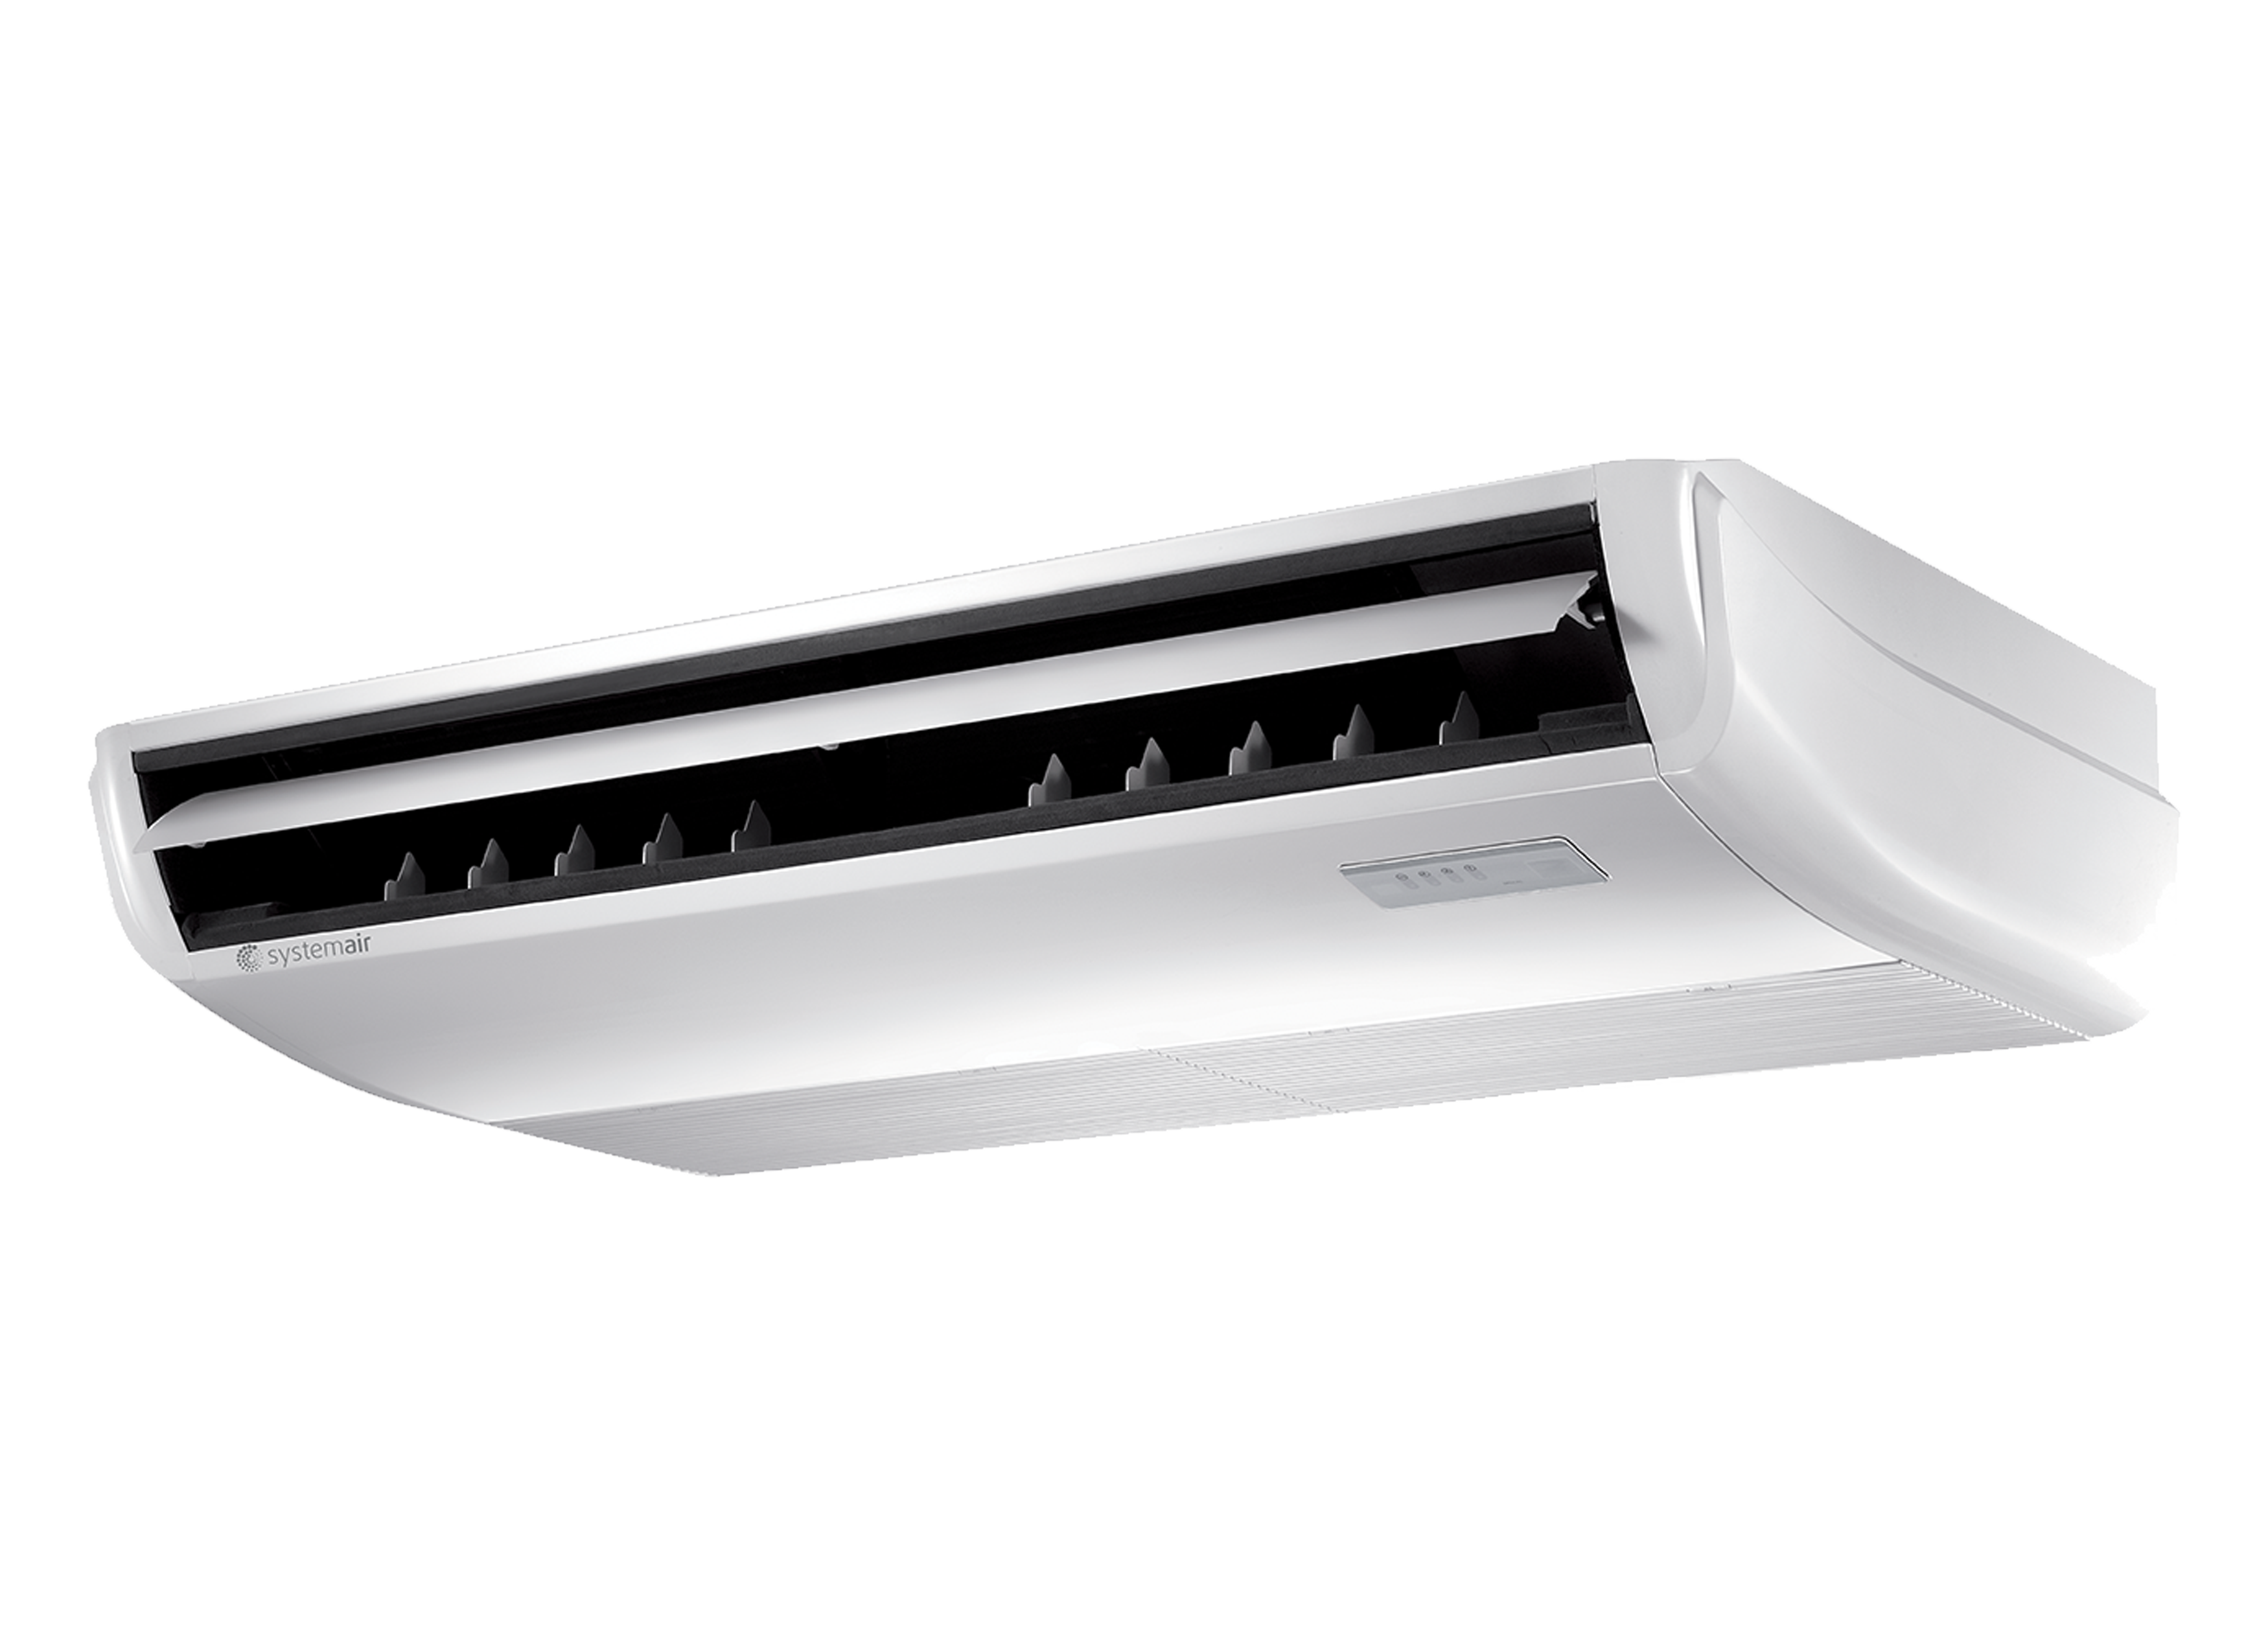 SYSPLIT CEILING - Split Systems - Air Conditioners - Products - Systemair